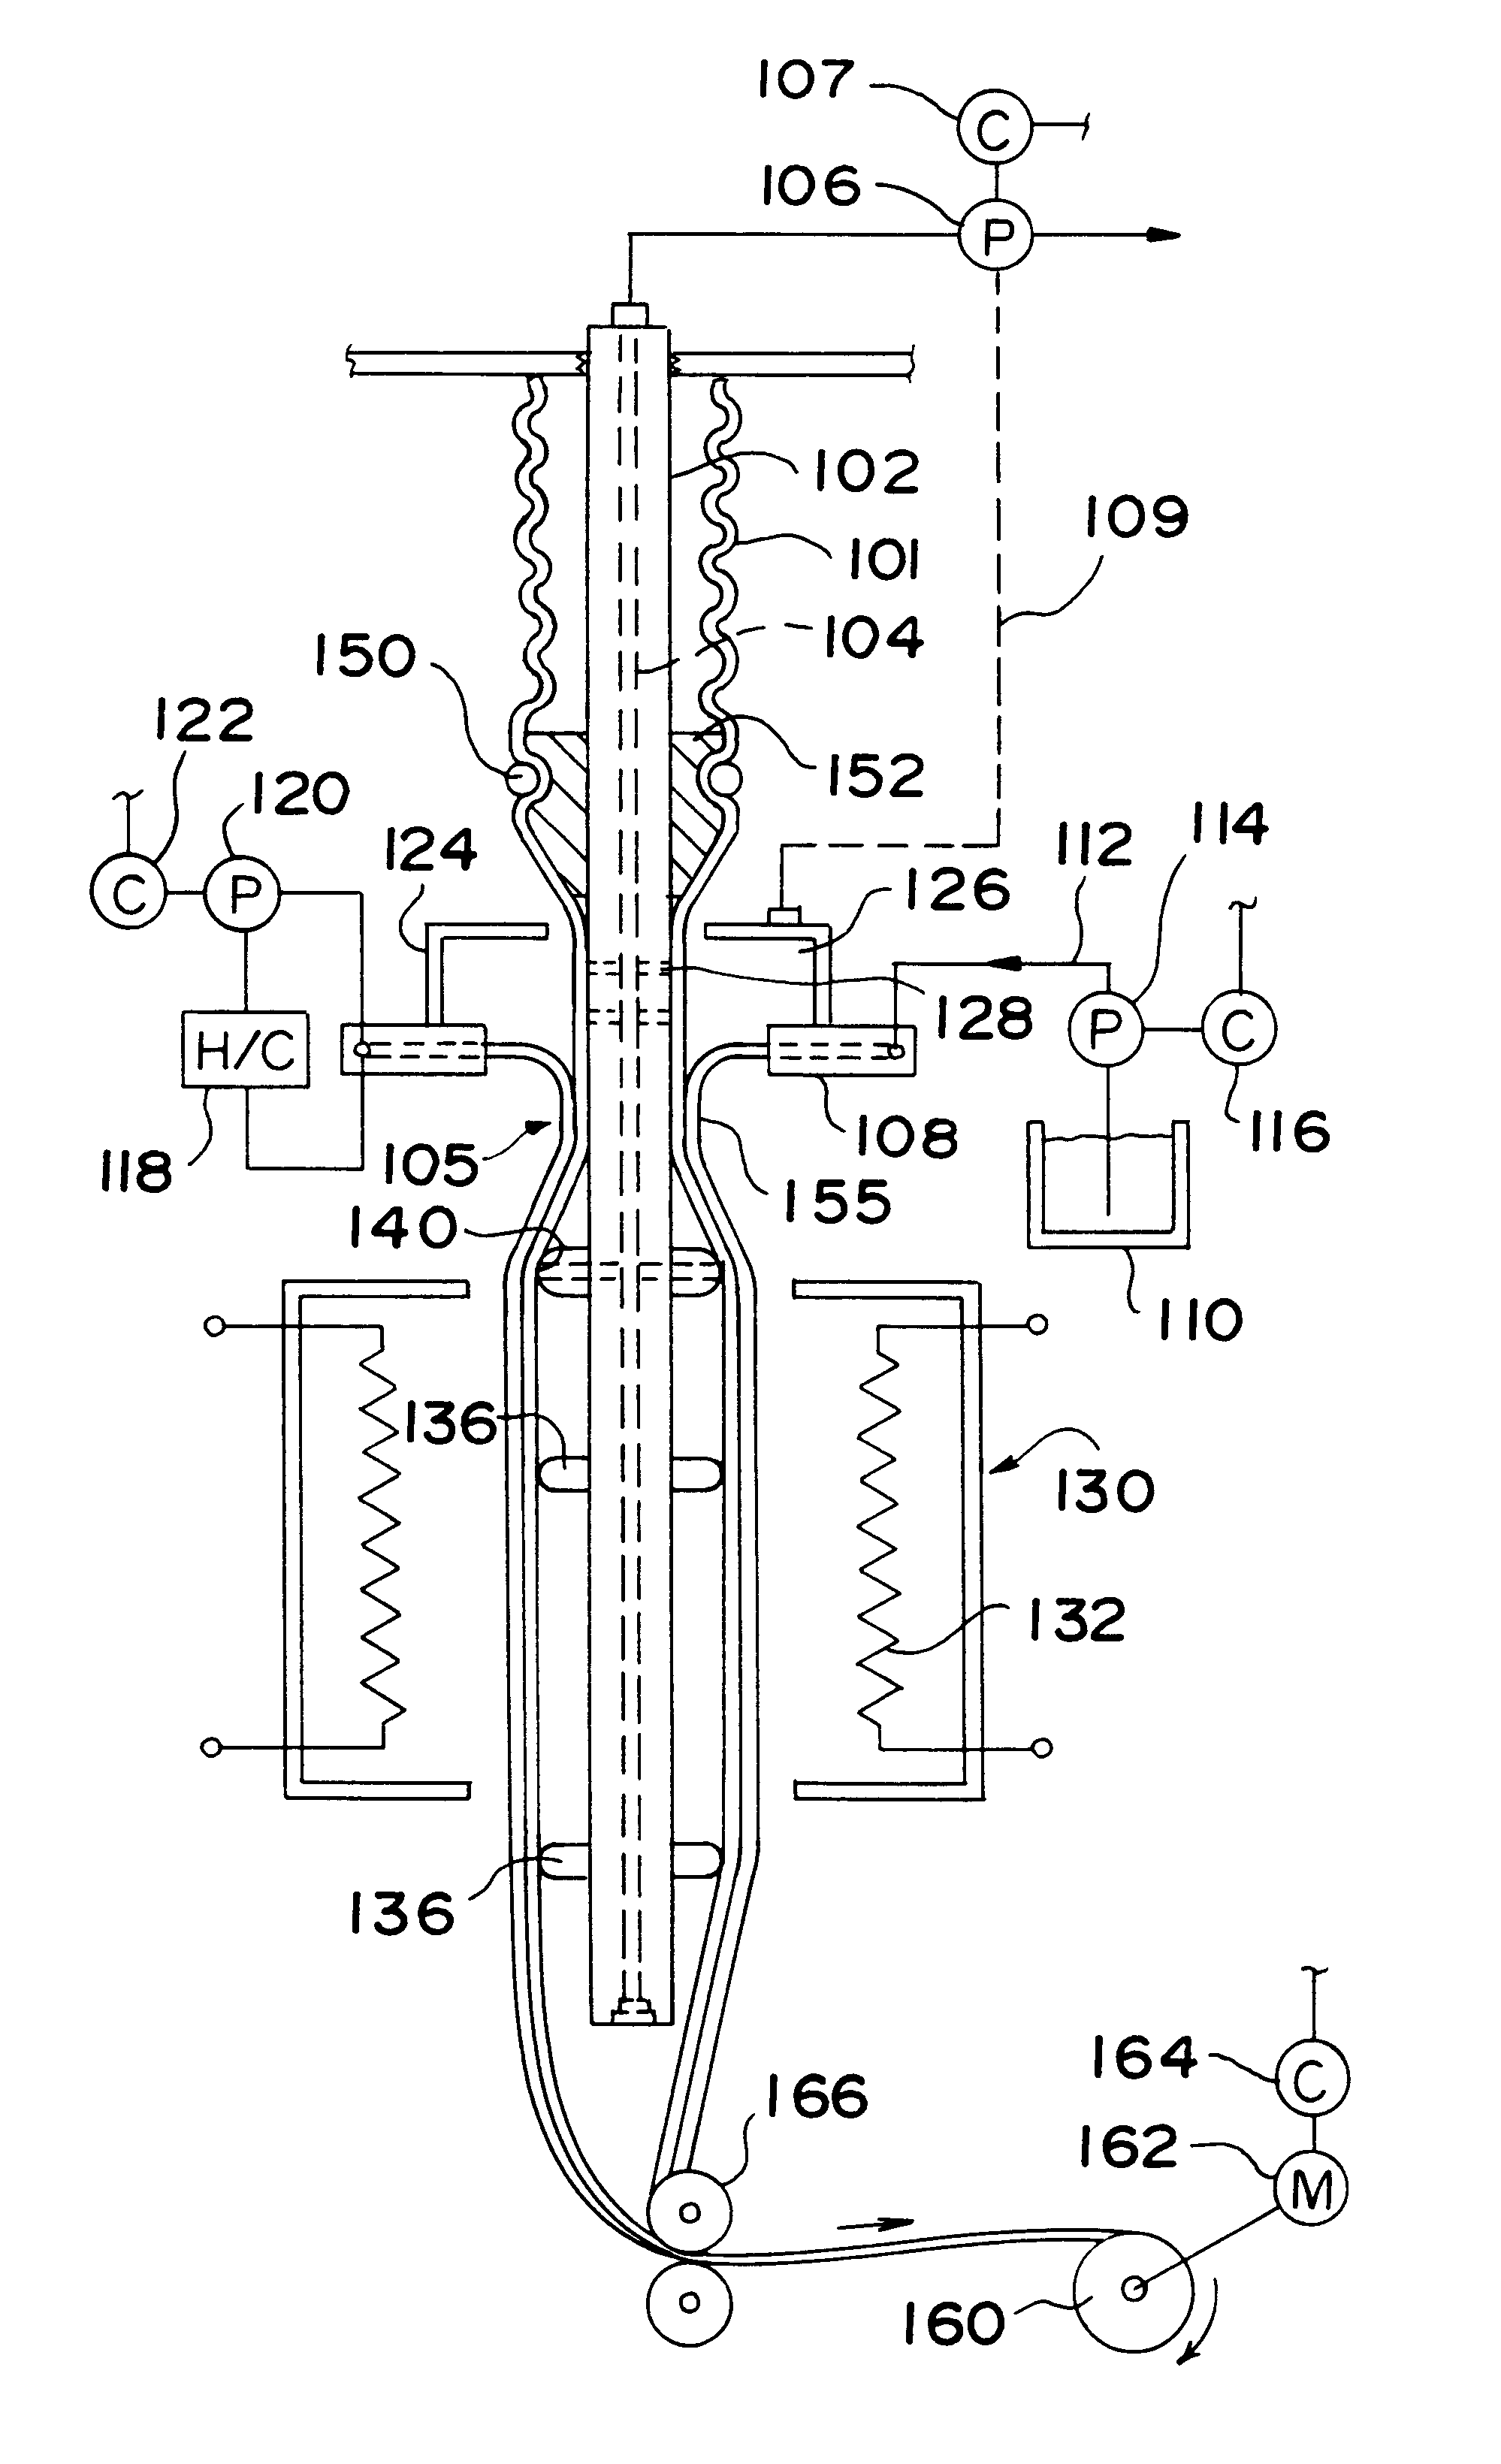 Apparatus and process for making prosthetic suction sleeve